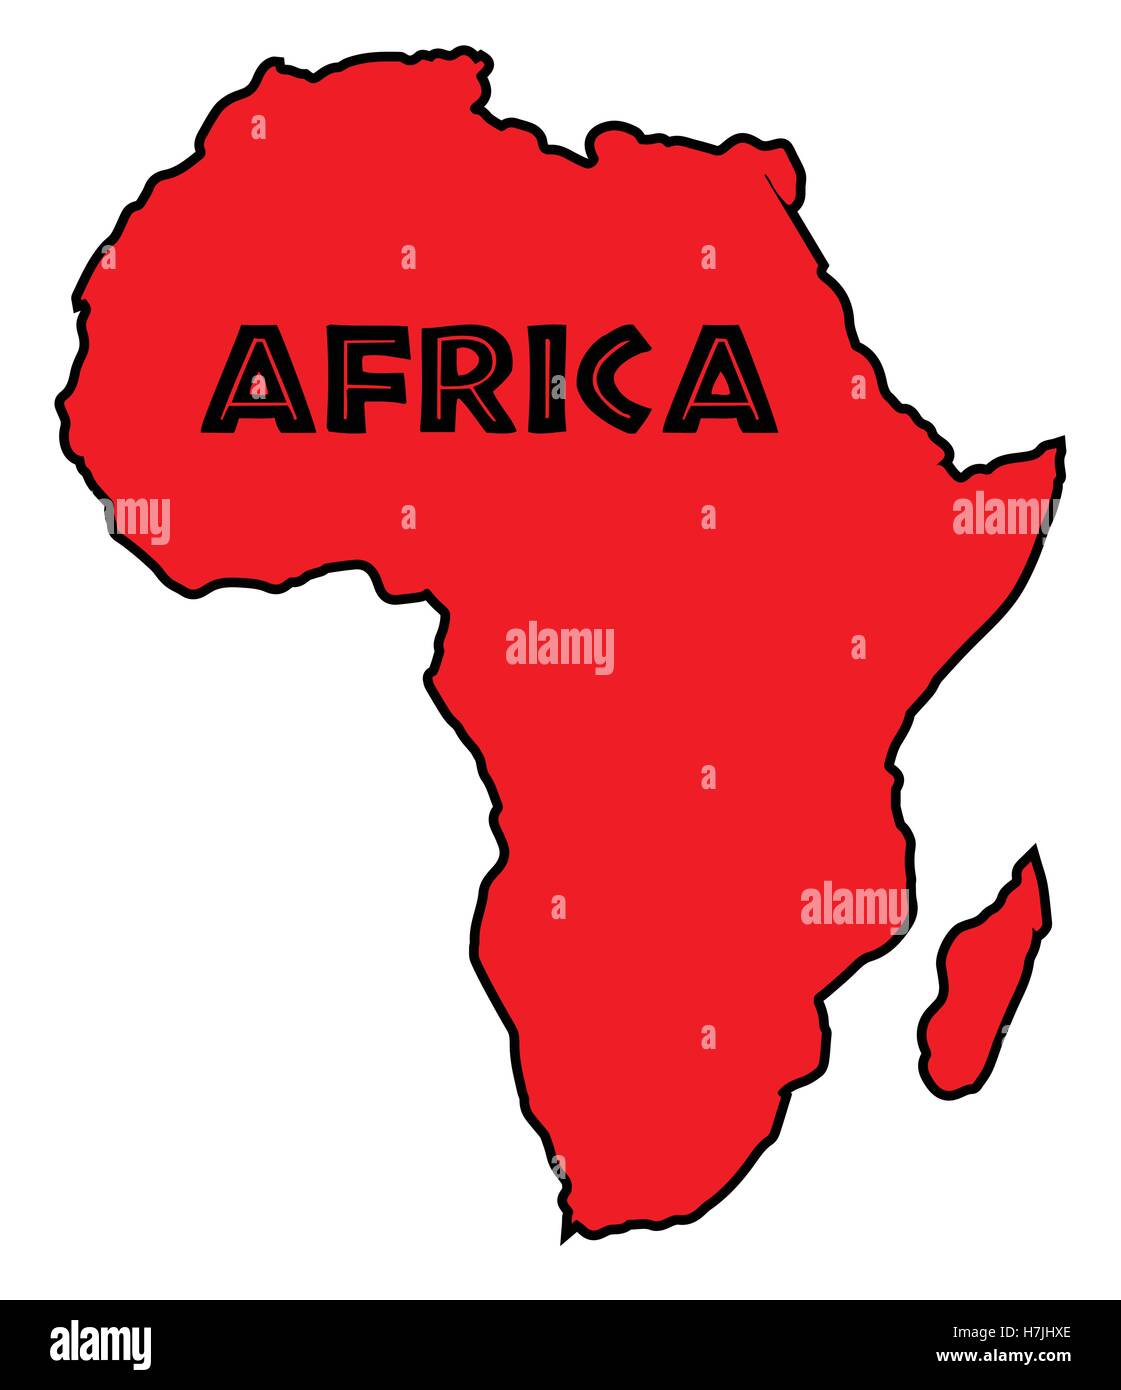 Red silhouette outline map of Africa over a white background Stock Vector